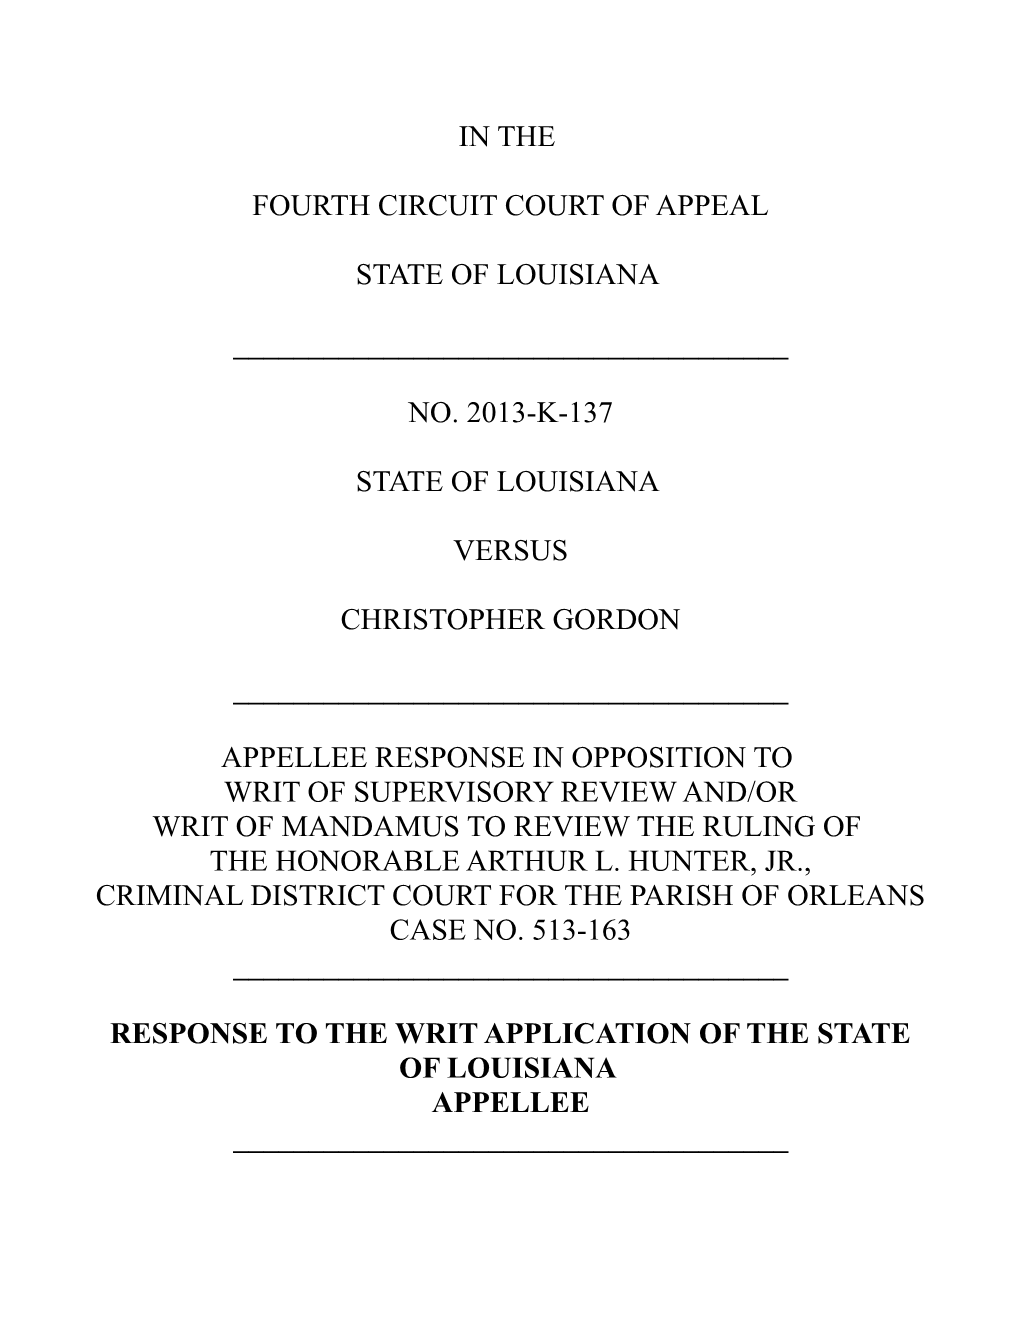 Fourth Circuit Court of Appeal